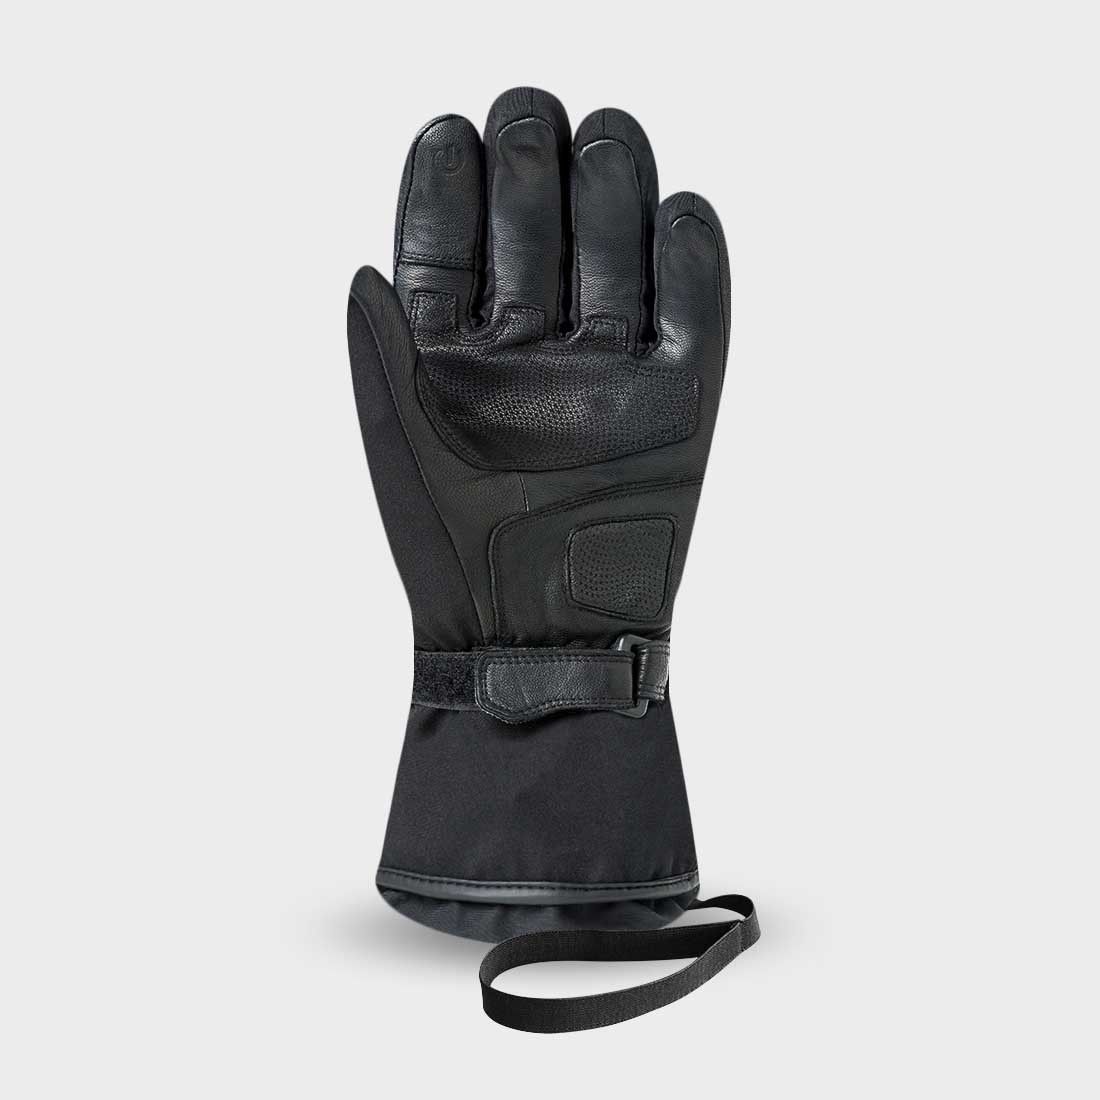 RACER CONNECTIC 3 - Heated gloves